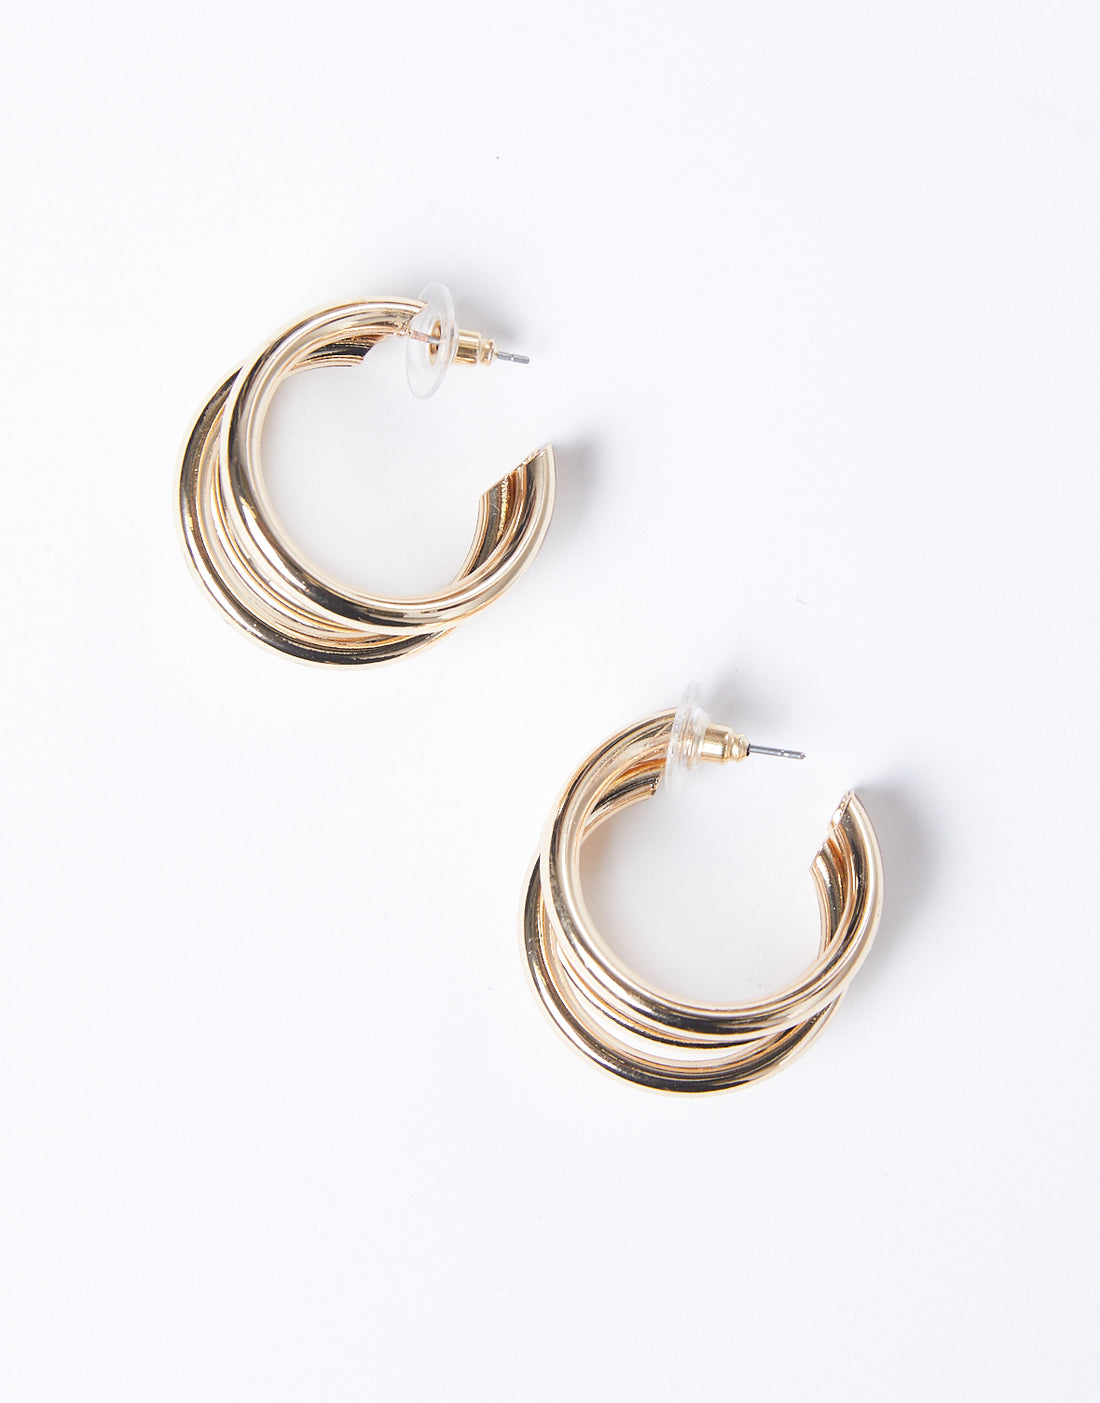 Layers On Layers Hoop Earrings Jewelry -2020AVE